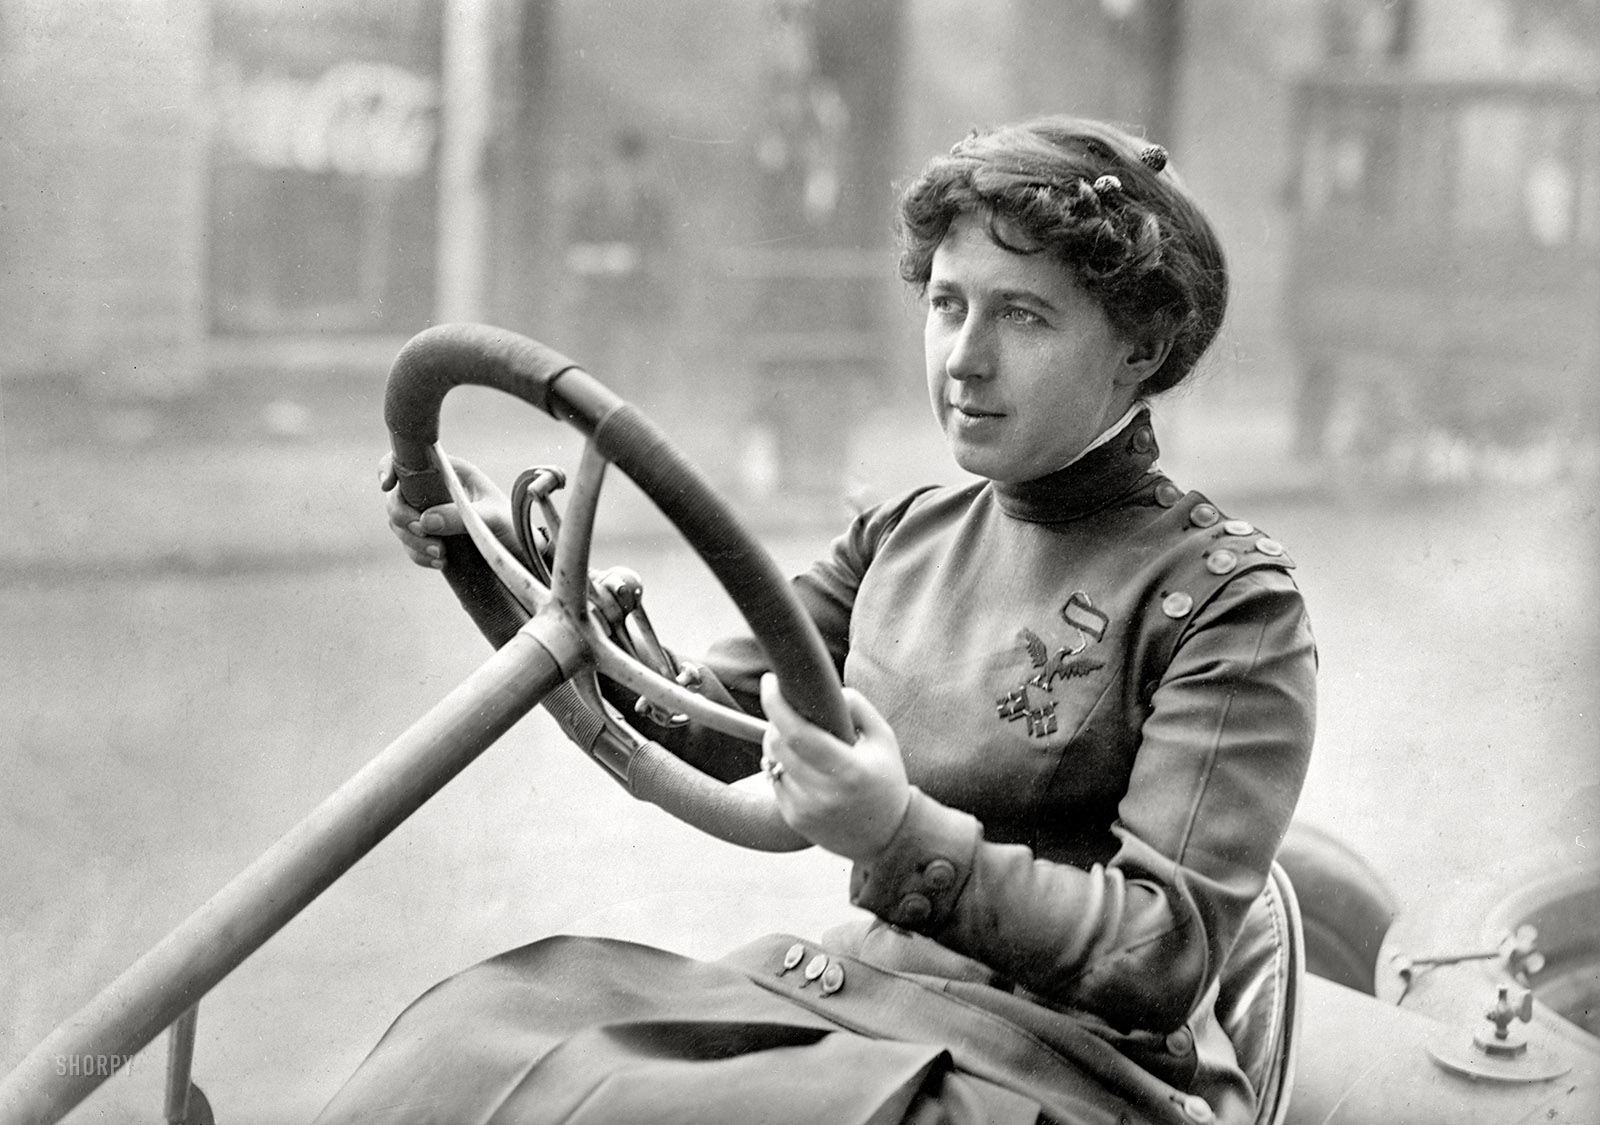 At the wheel circa 1915. "NO CAPTION" is the caption here. Perhaps someone will recognize the insignia on the lady's uniform. Harris & Ewing Collection glass negative. View full size.